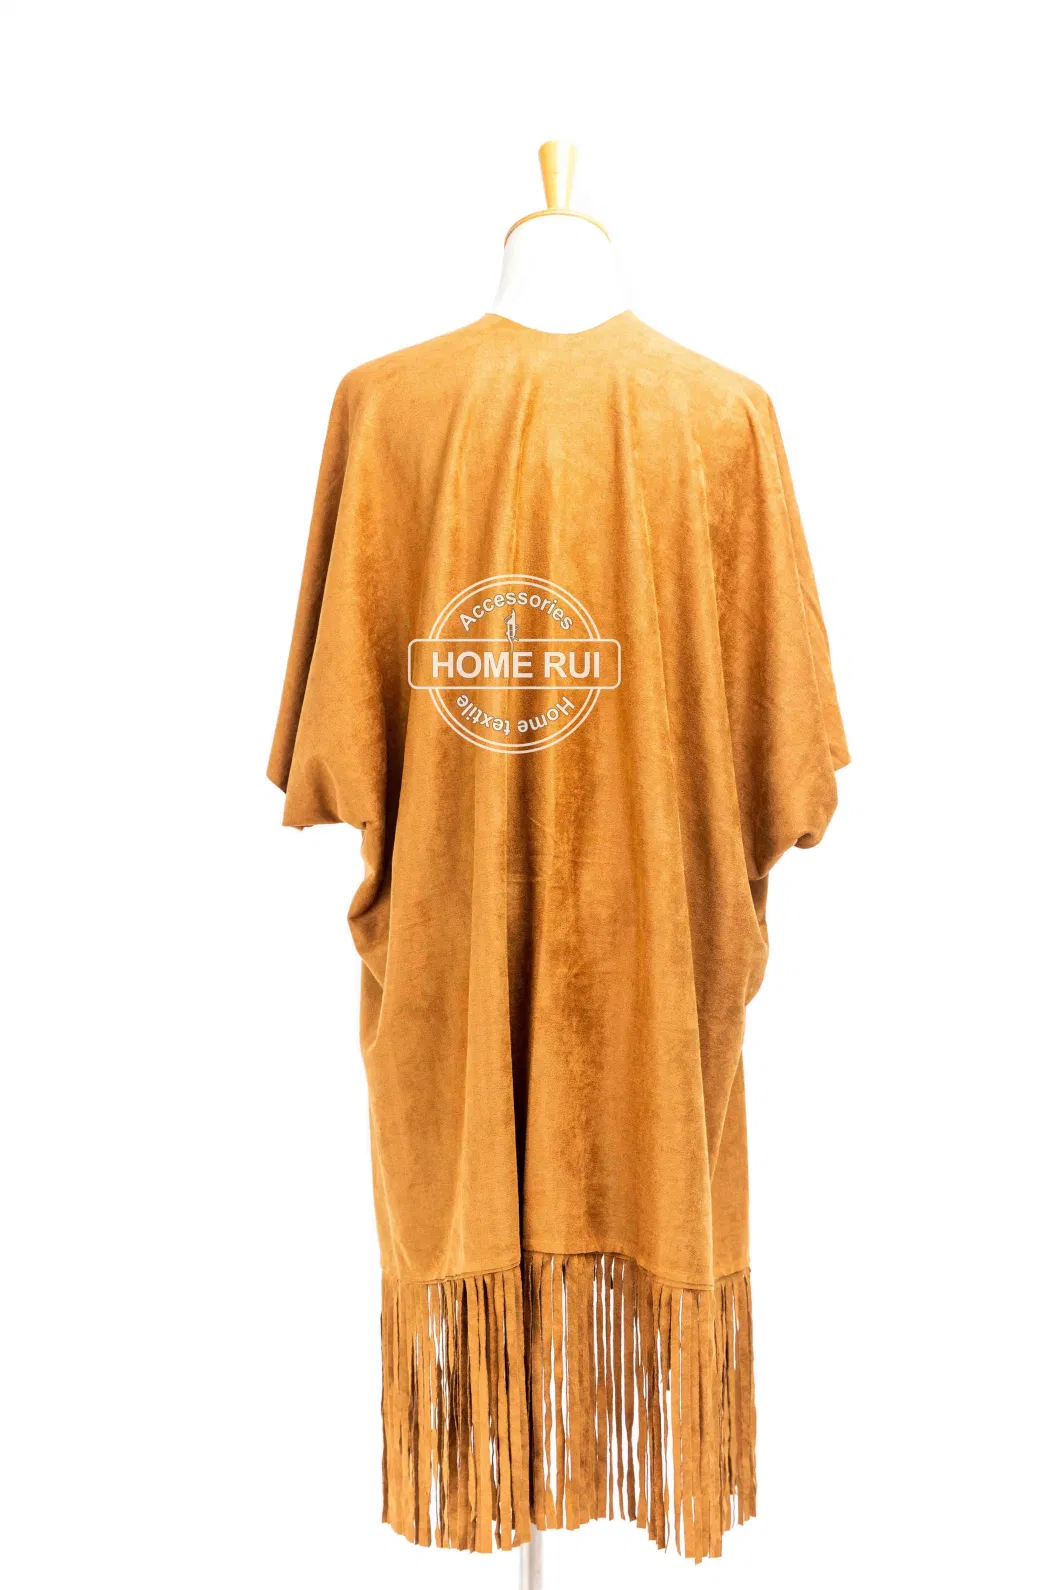 Supplier Outfit Fall Winter Lady Fashion Couture Plus Batwing Short Sleeve Solid Brown Tassel Cozy Fluffy Chunky Sweater Boat V-Neck Blanket Cloak Pallium